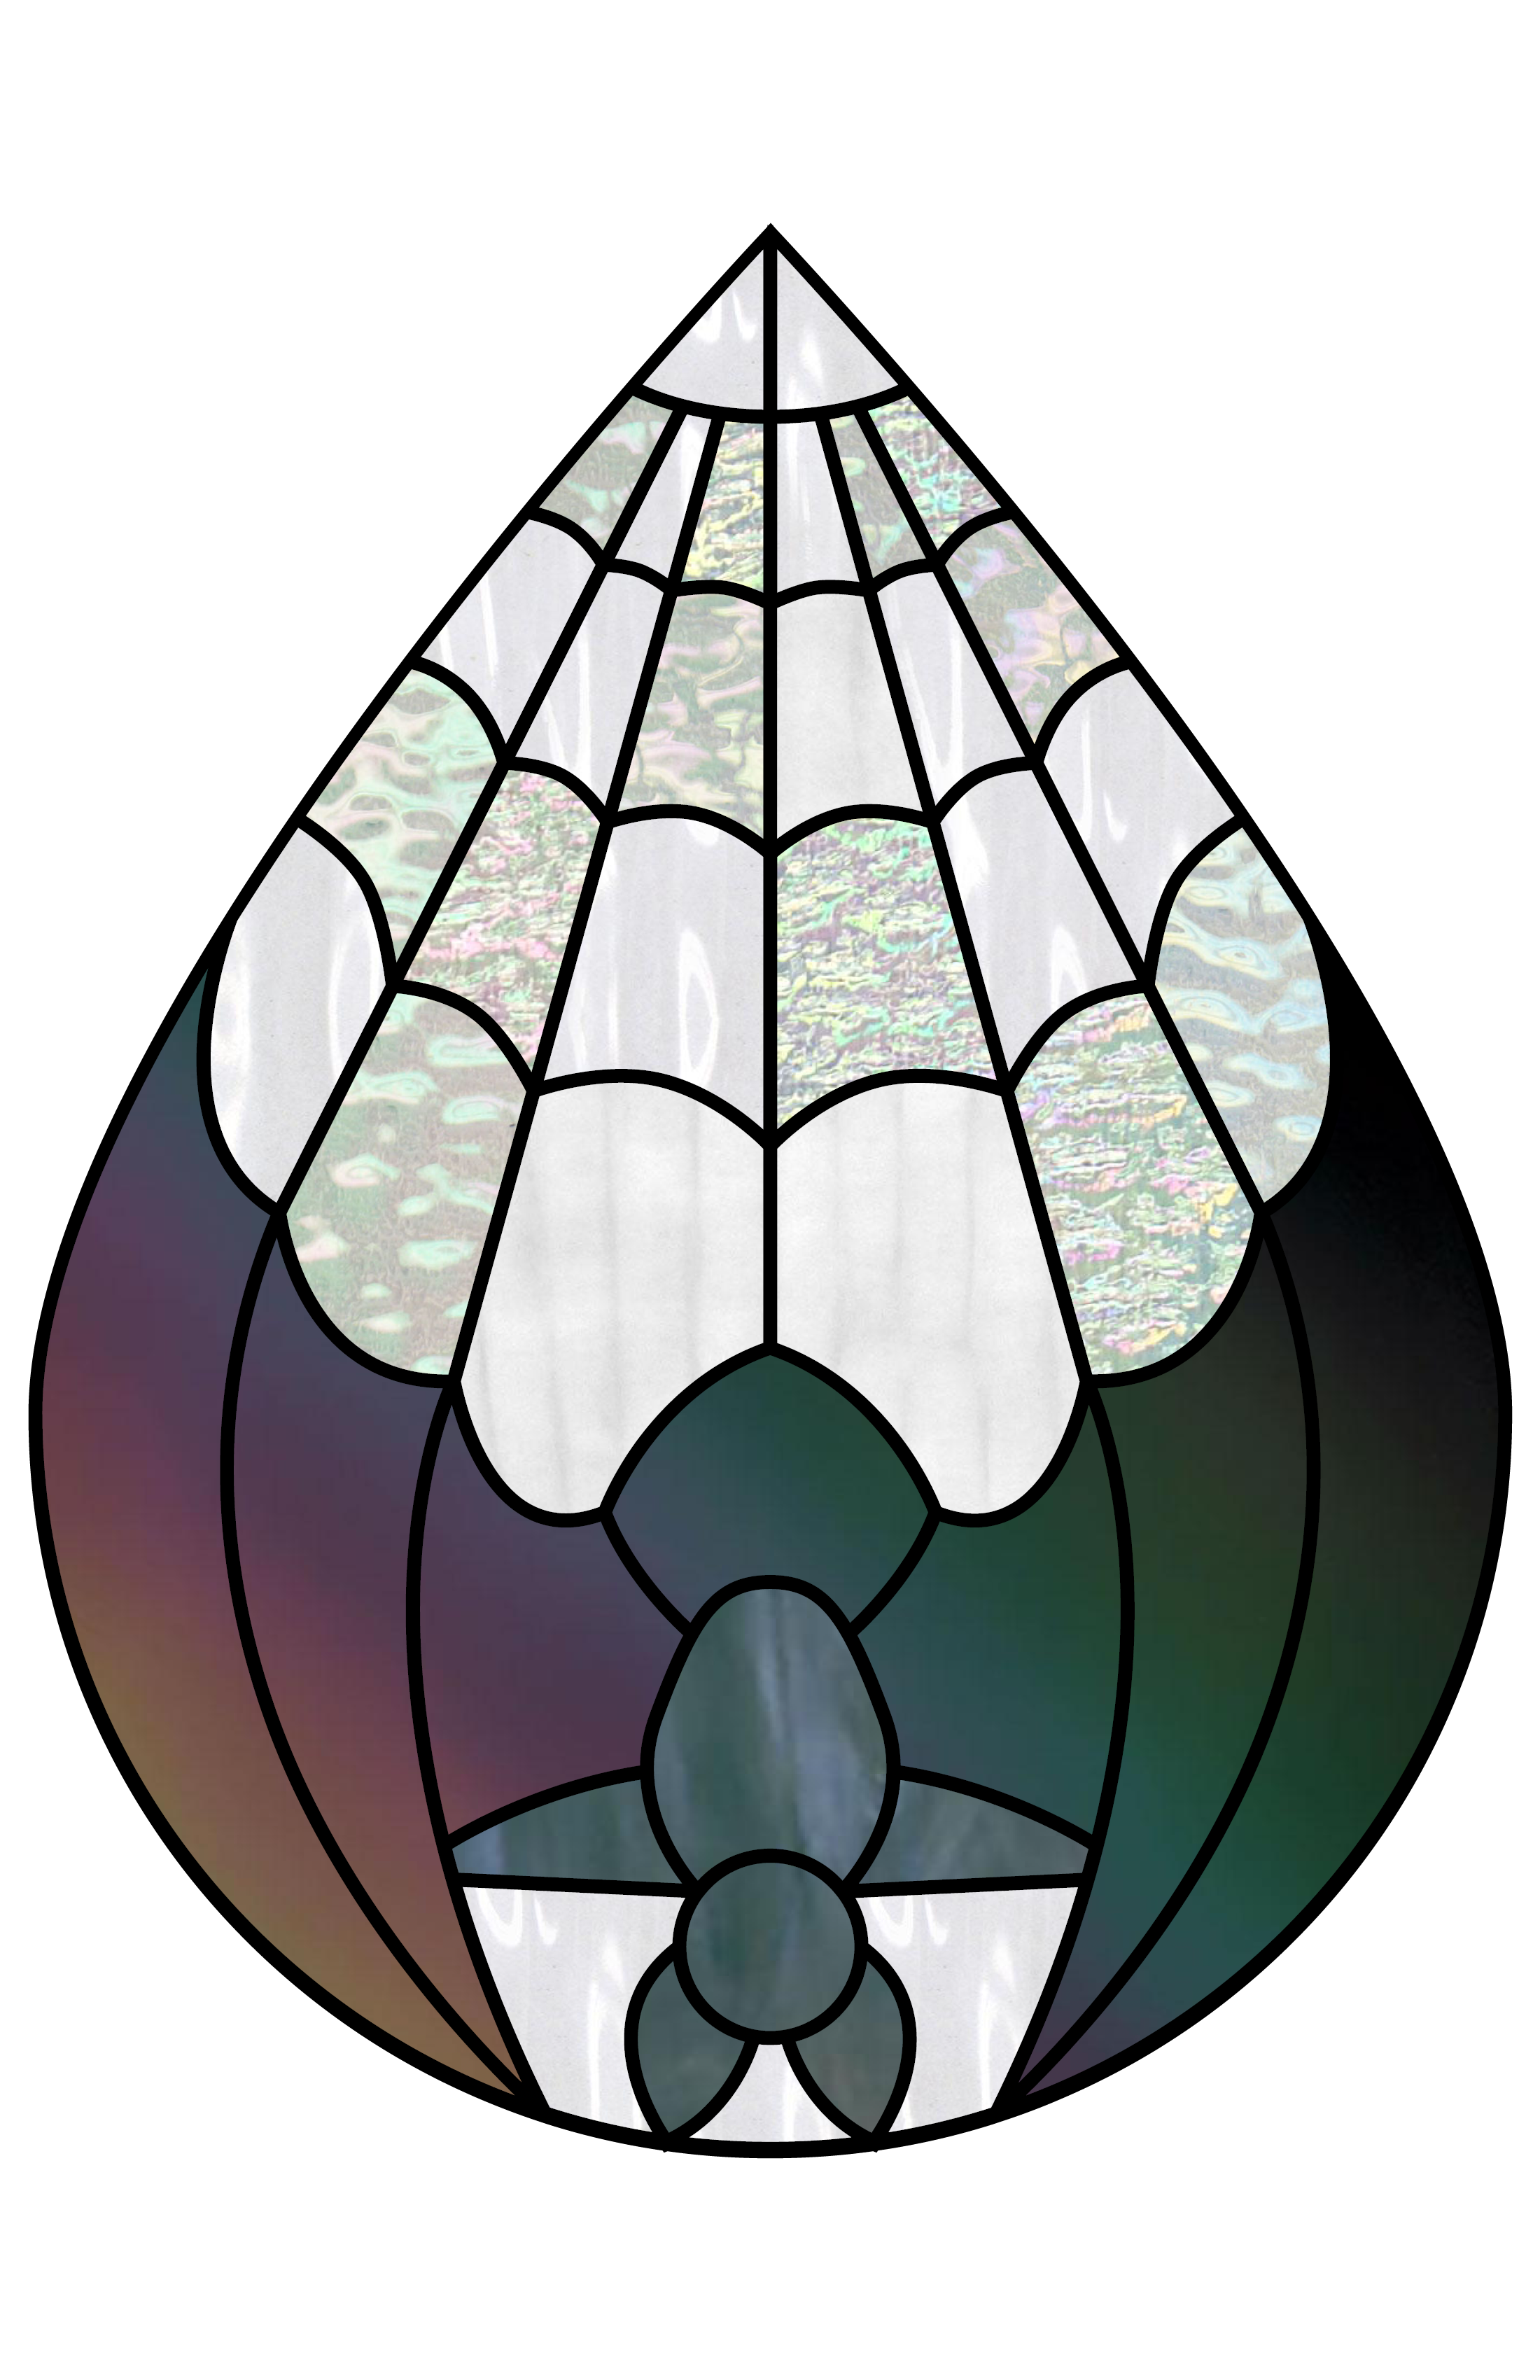 A Bunch Of Gothic Spooky Bat Pattern Downloads For A Good Cause Thanks Y all For Helping Me Come Up With Ideas R StainedGlass